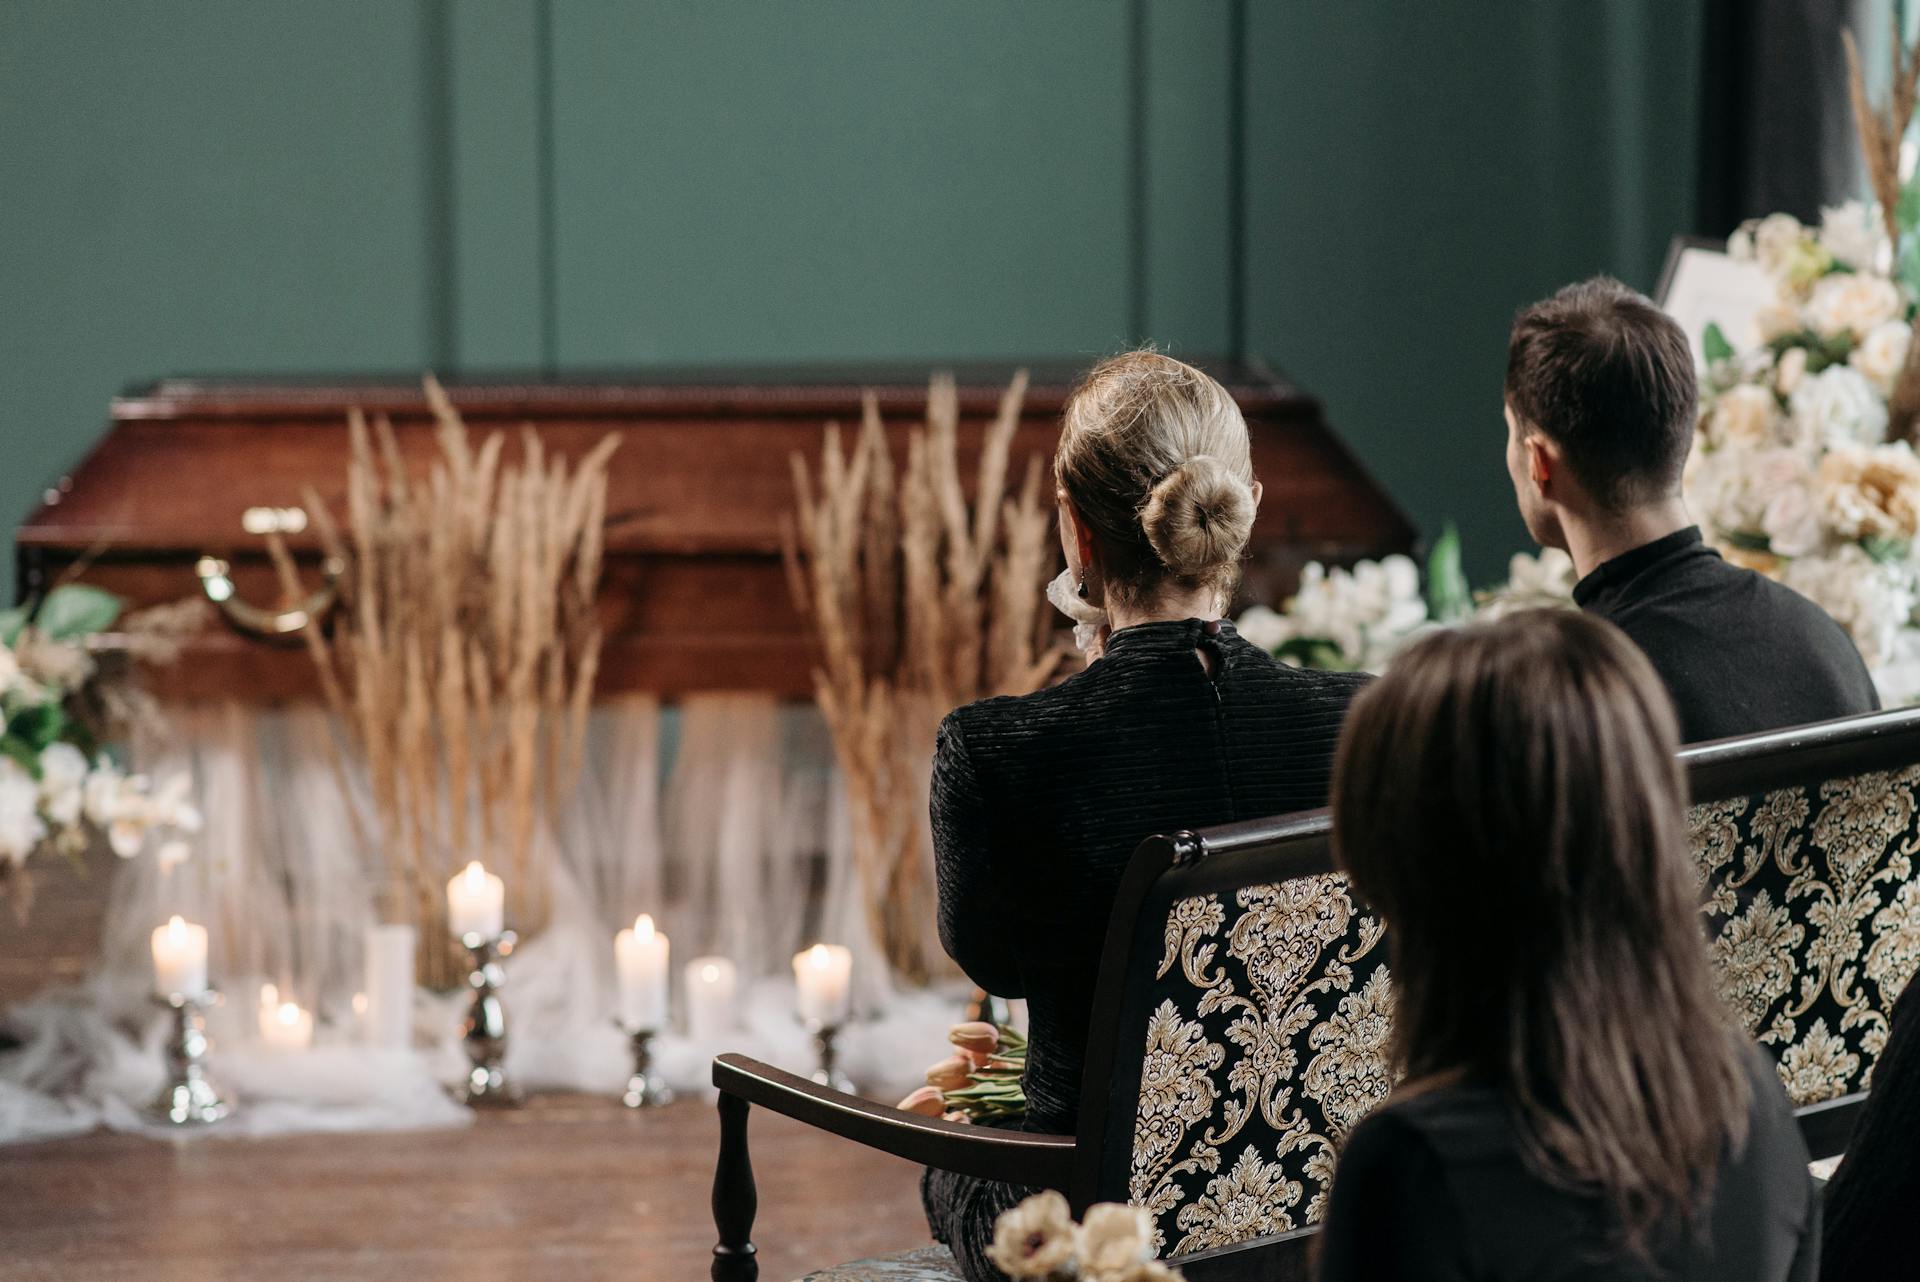 People sitting at a funeral | Source: Pexels